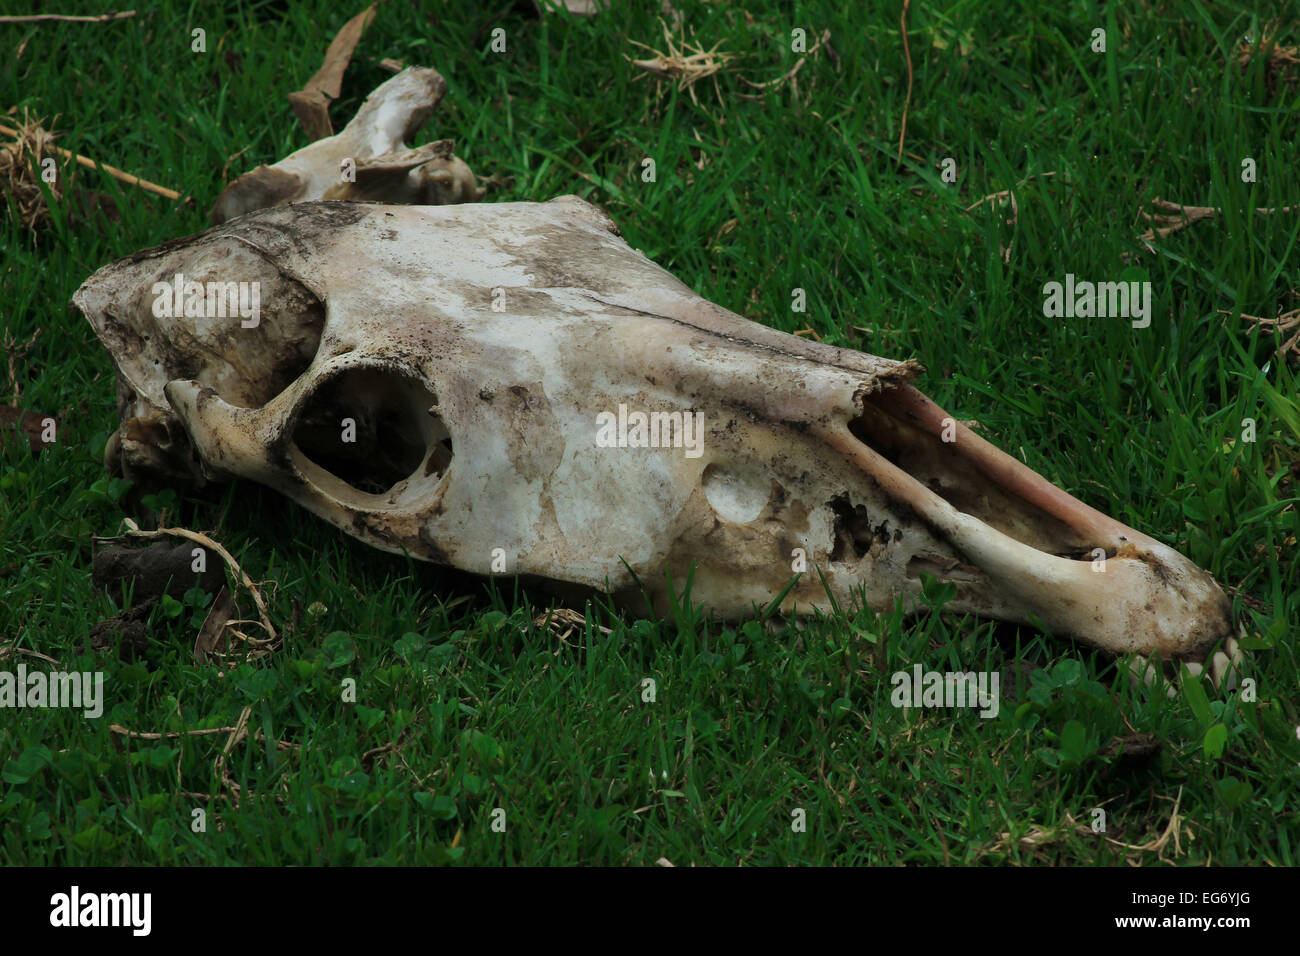 The skull of a horse in a farmers pasture in Cotacachi, Ecuador Stock Photo